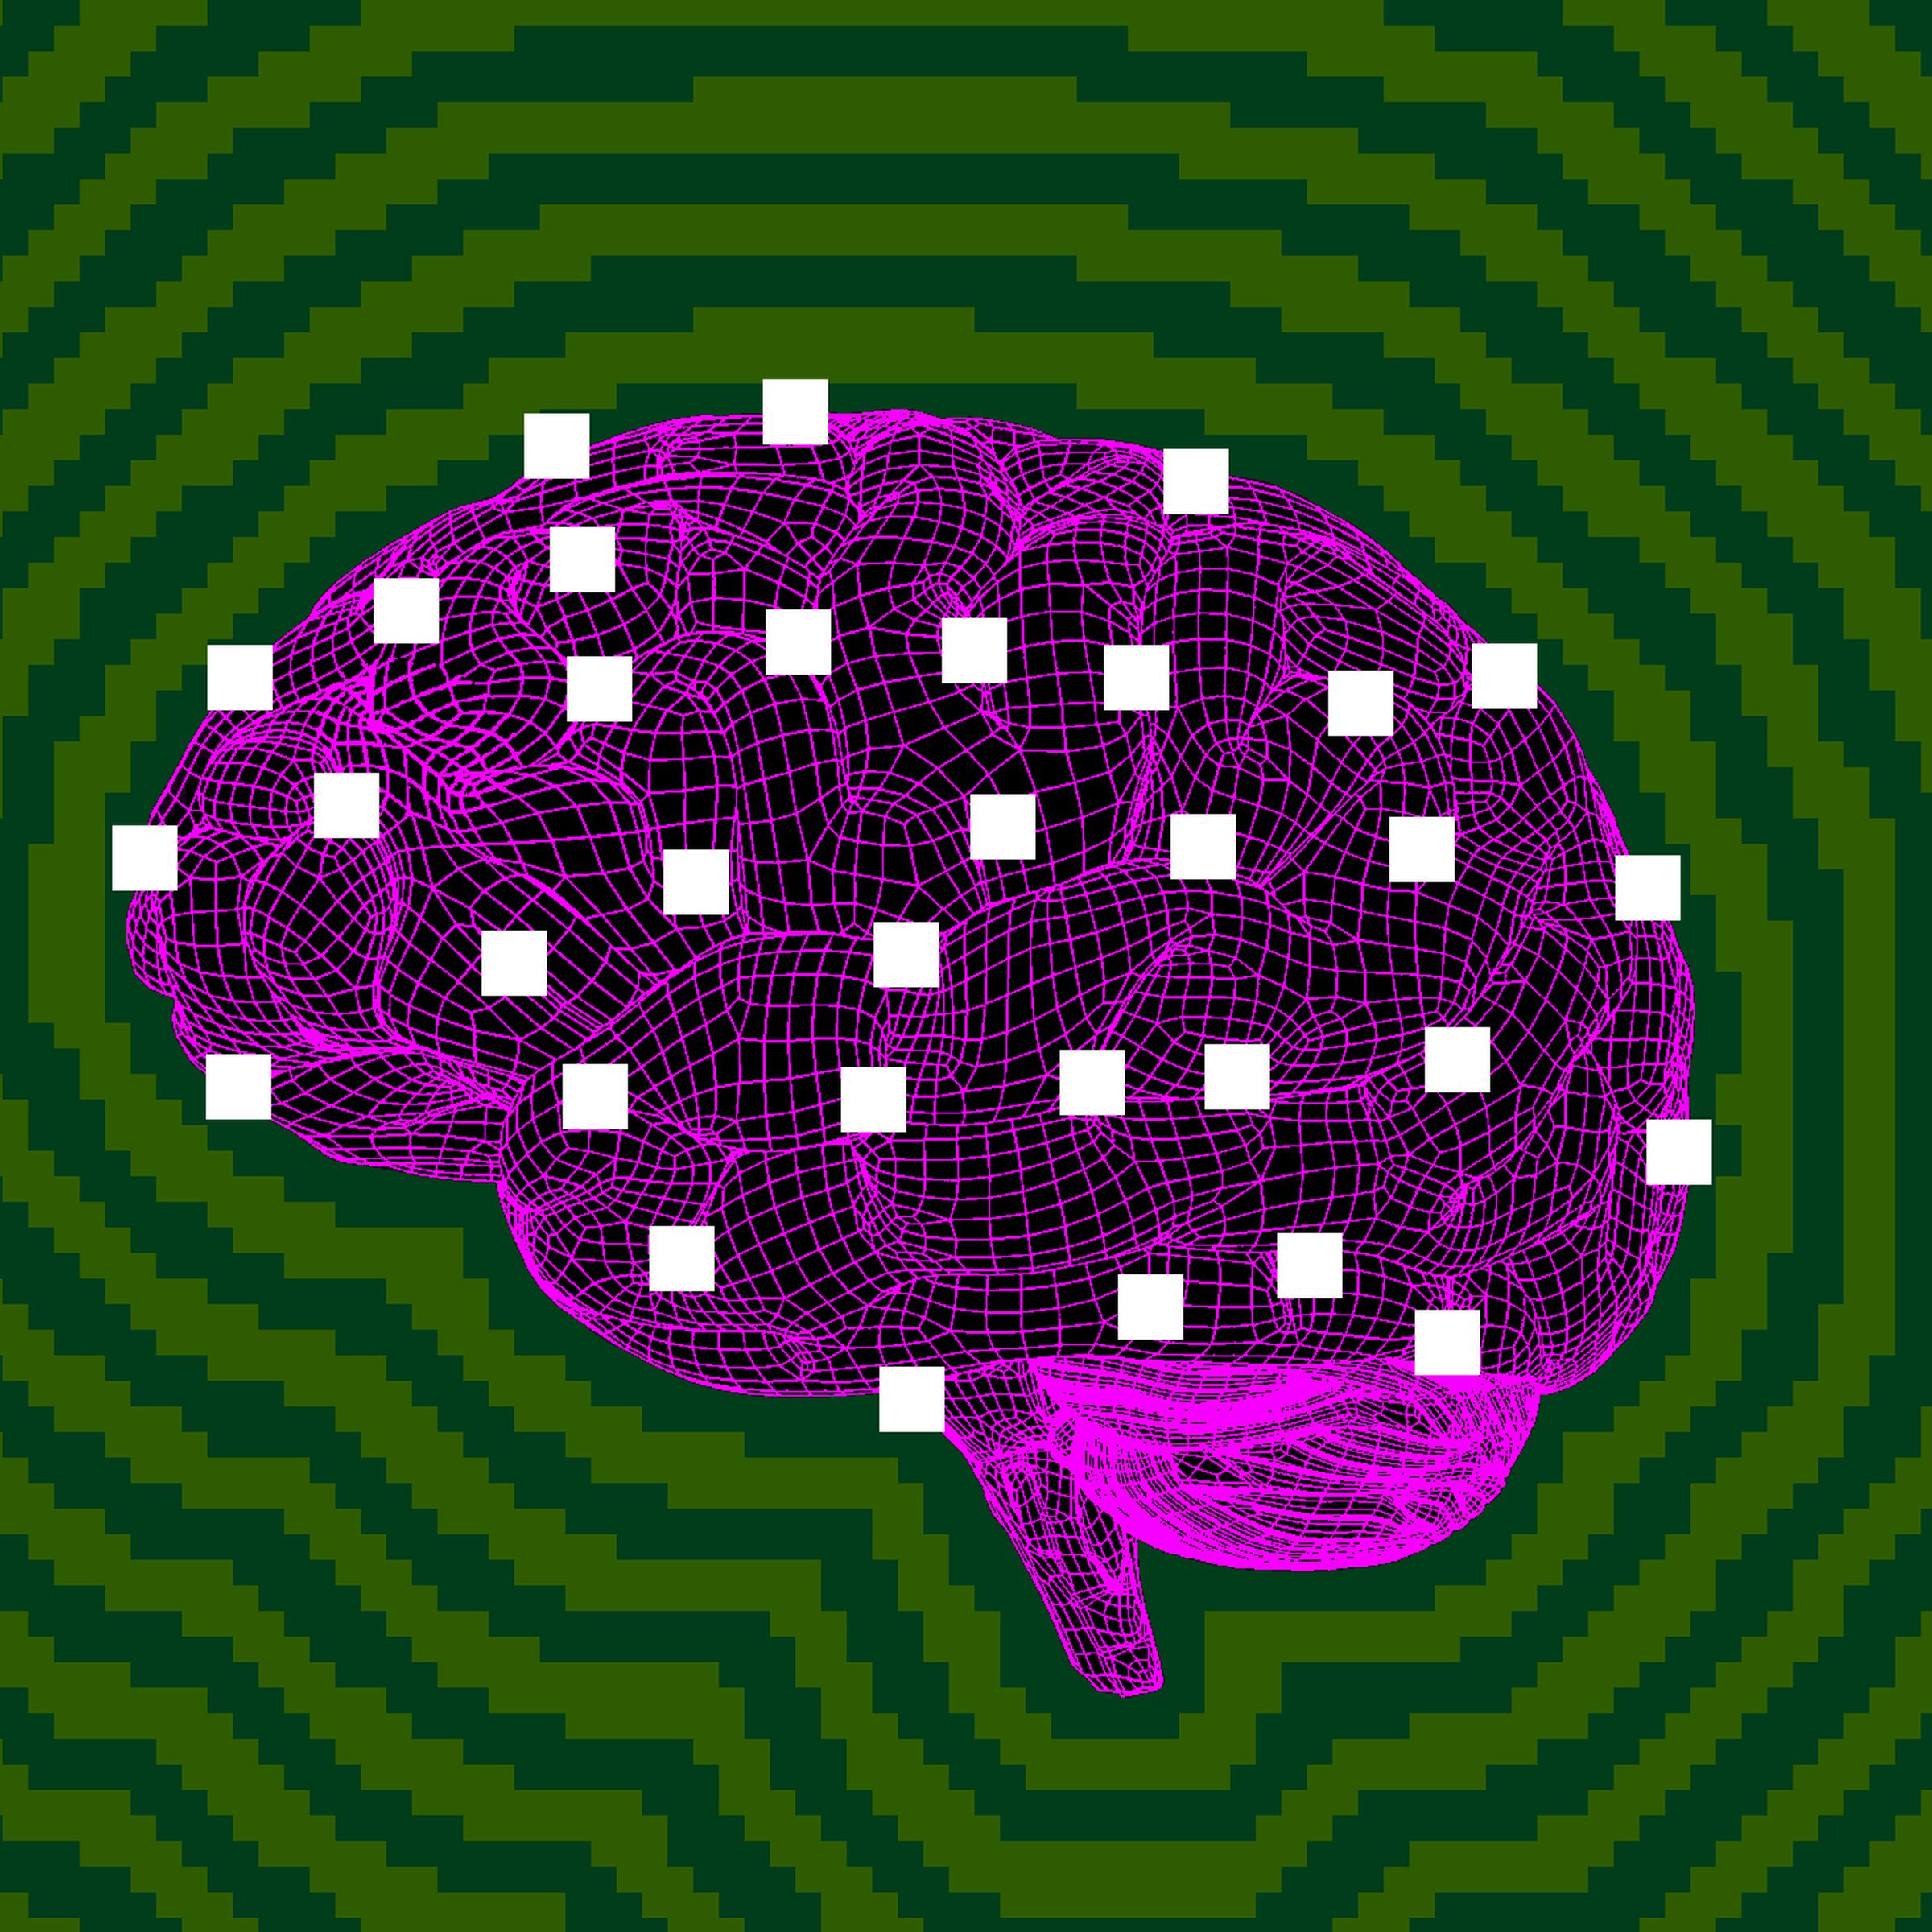 Photo illustration of a brain made of data points.